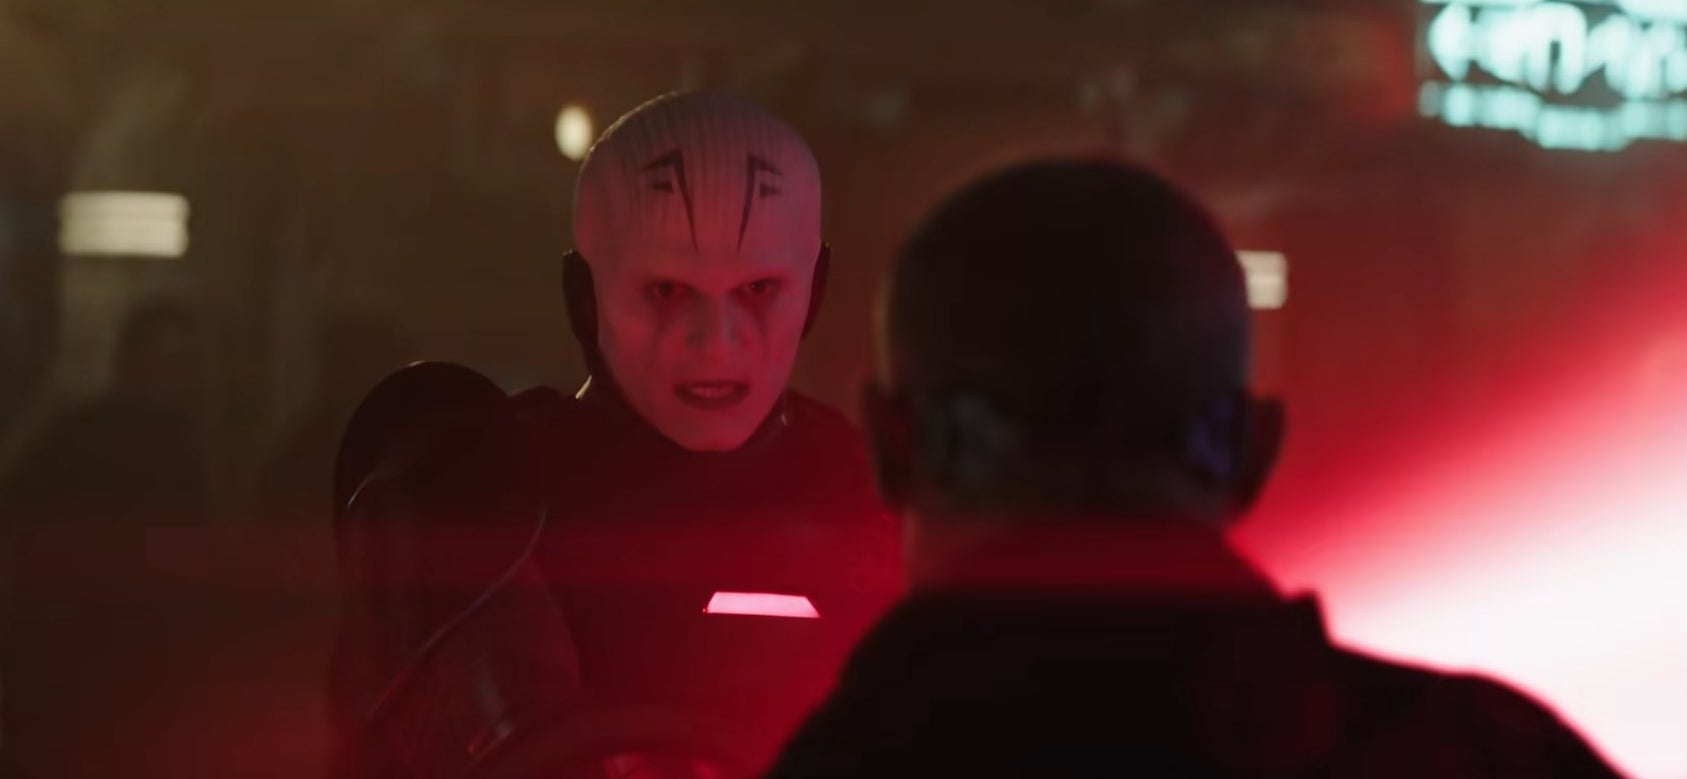 The Grand Inquisitor with his red lightsaber in &quot;Star Wars: Obi-Wan Kenobi&quot;